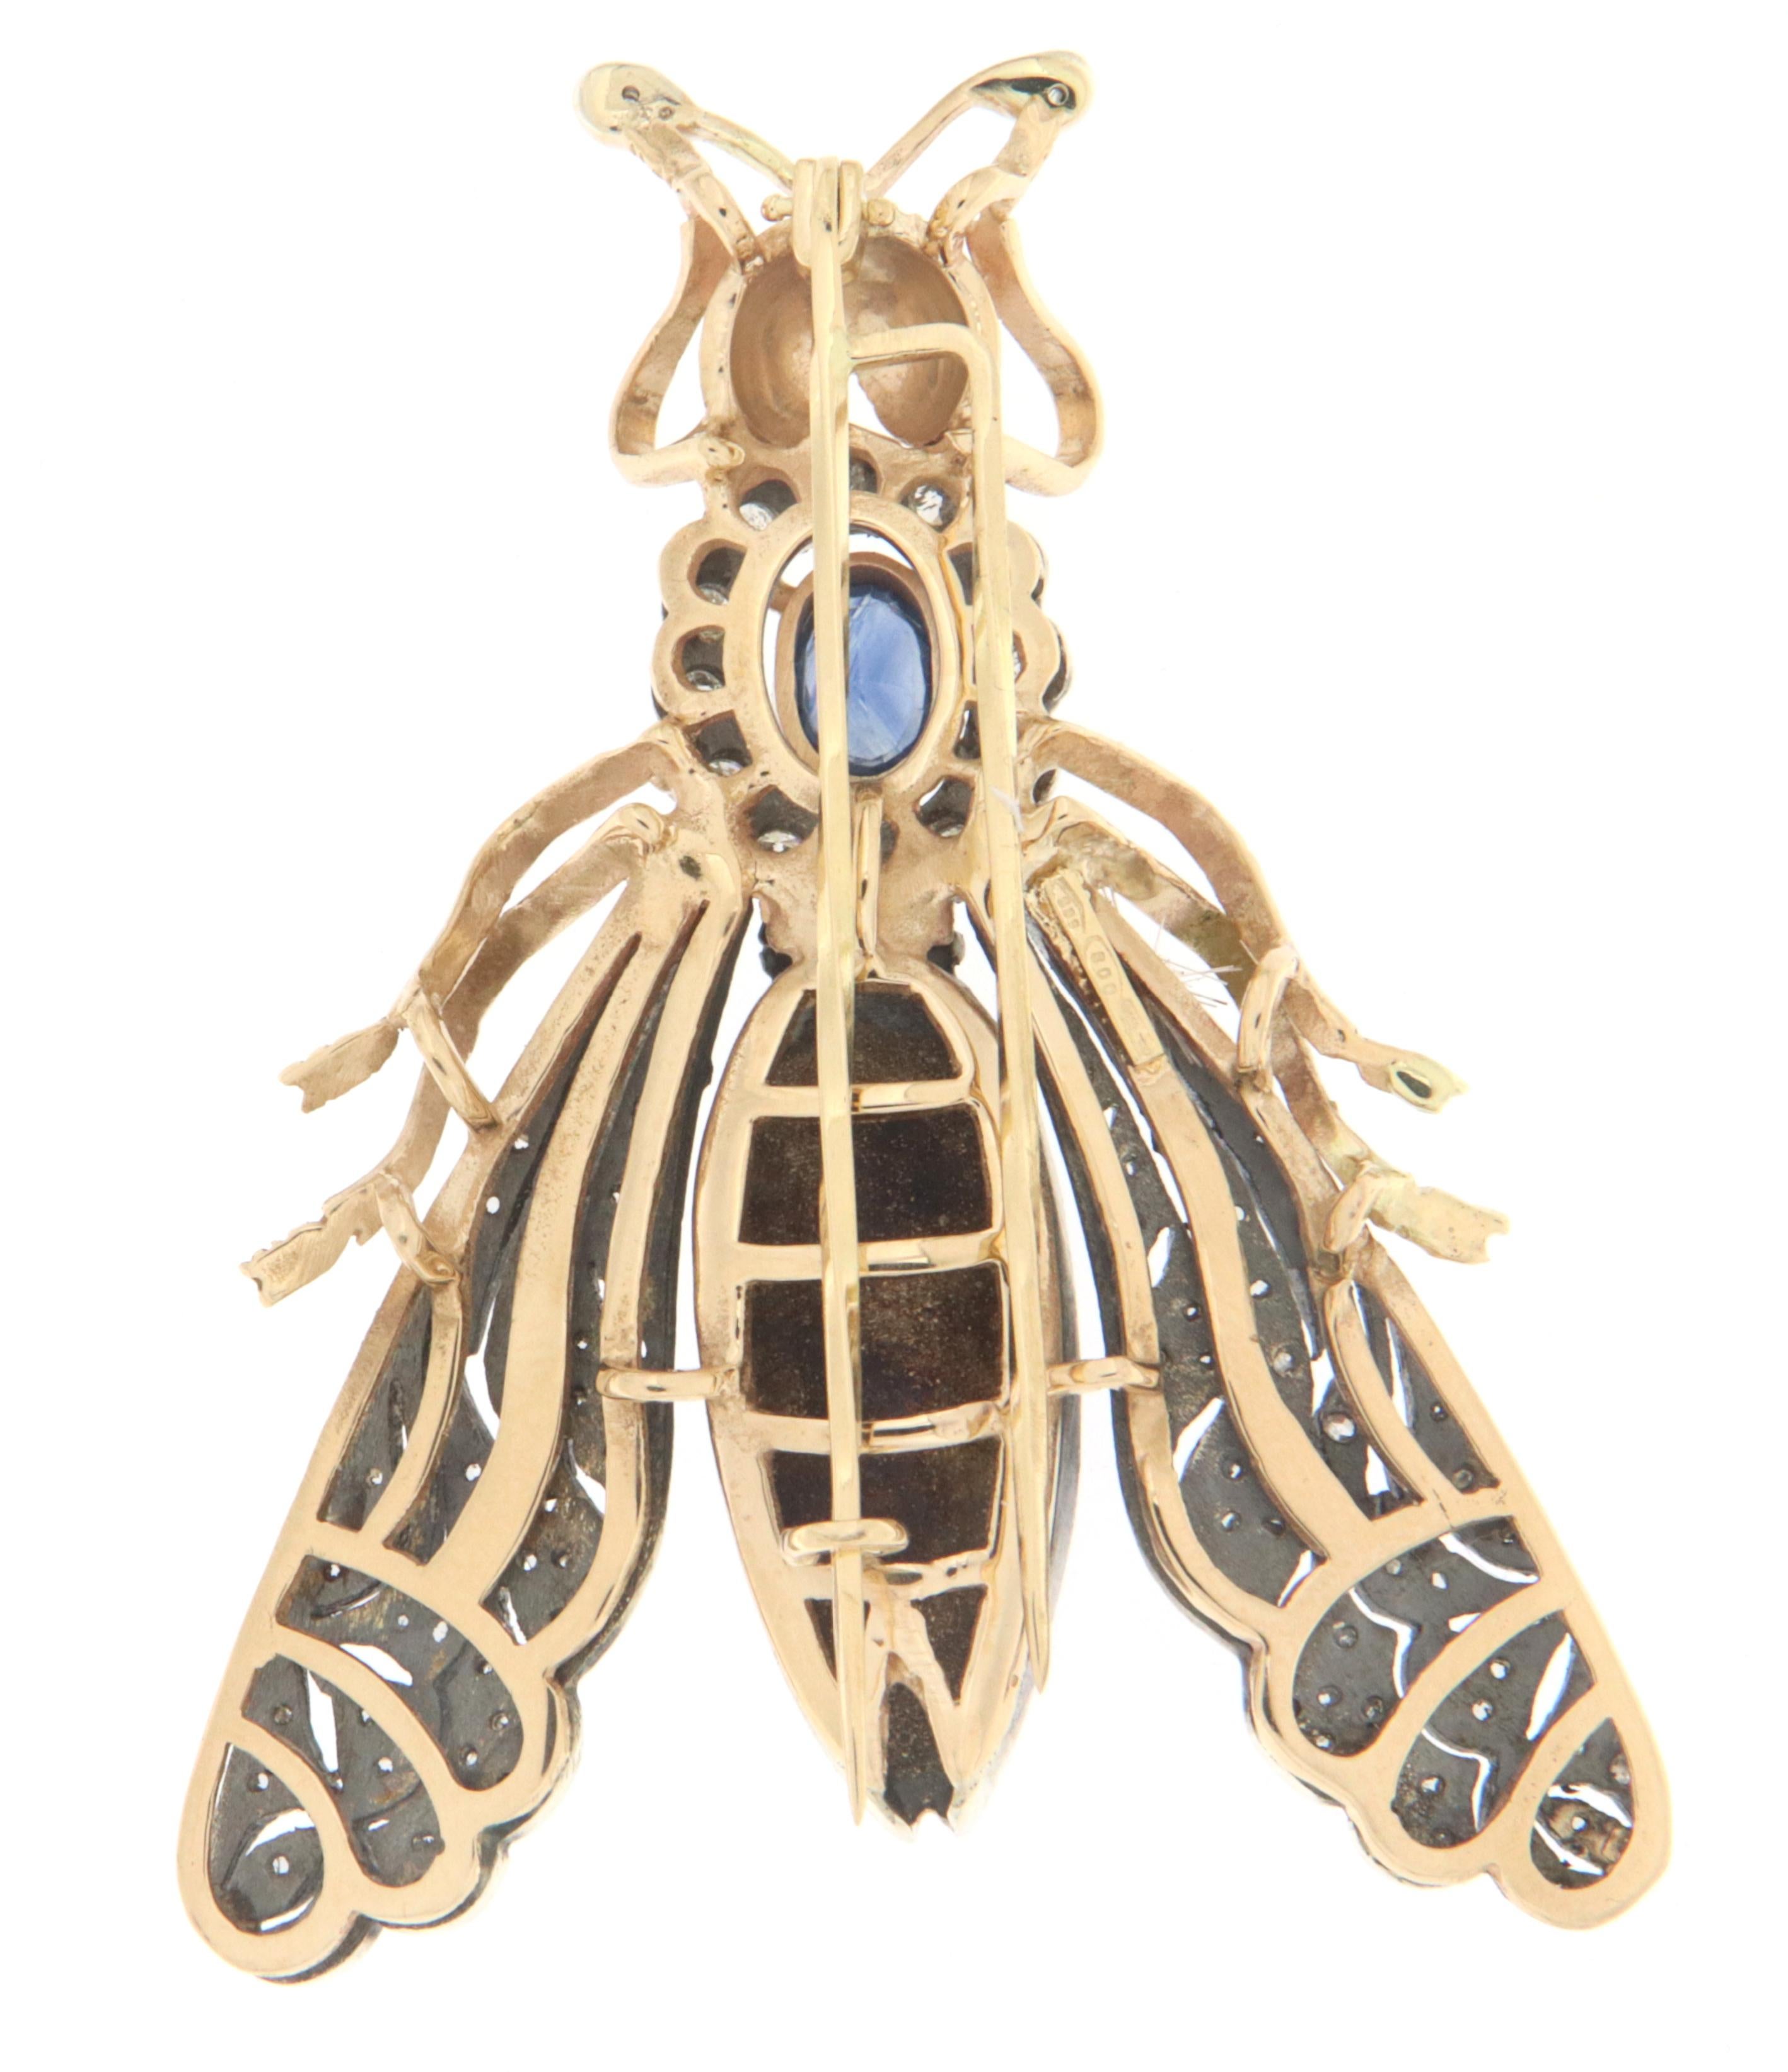 14 karat yellow gold and 800 thousandths silver butterfly brooch. Butterfly Handmade by our craftsmen and assembled with yellow enamel, old cut diamonds,rubies and sapphire.

diamonds weight 1.50 karat
Sapphire weight 1.30 karat
Brooch total weight